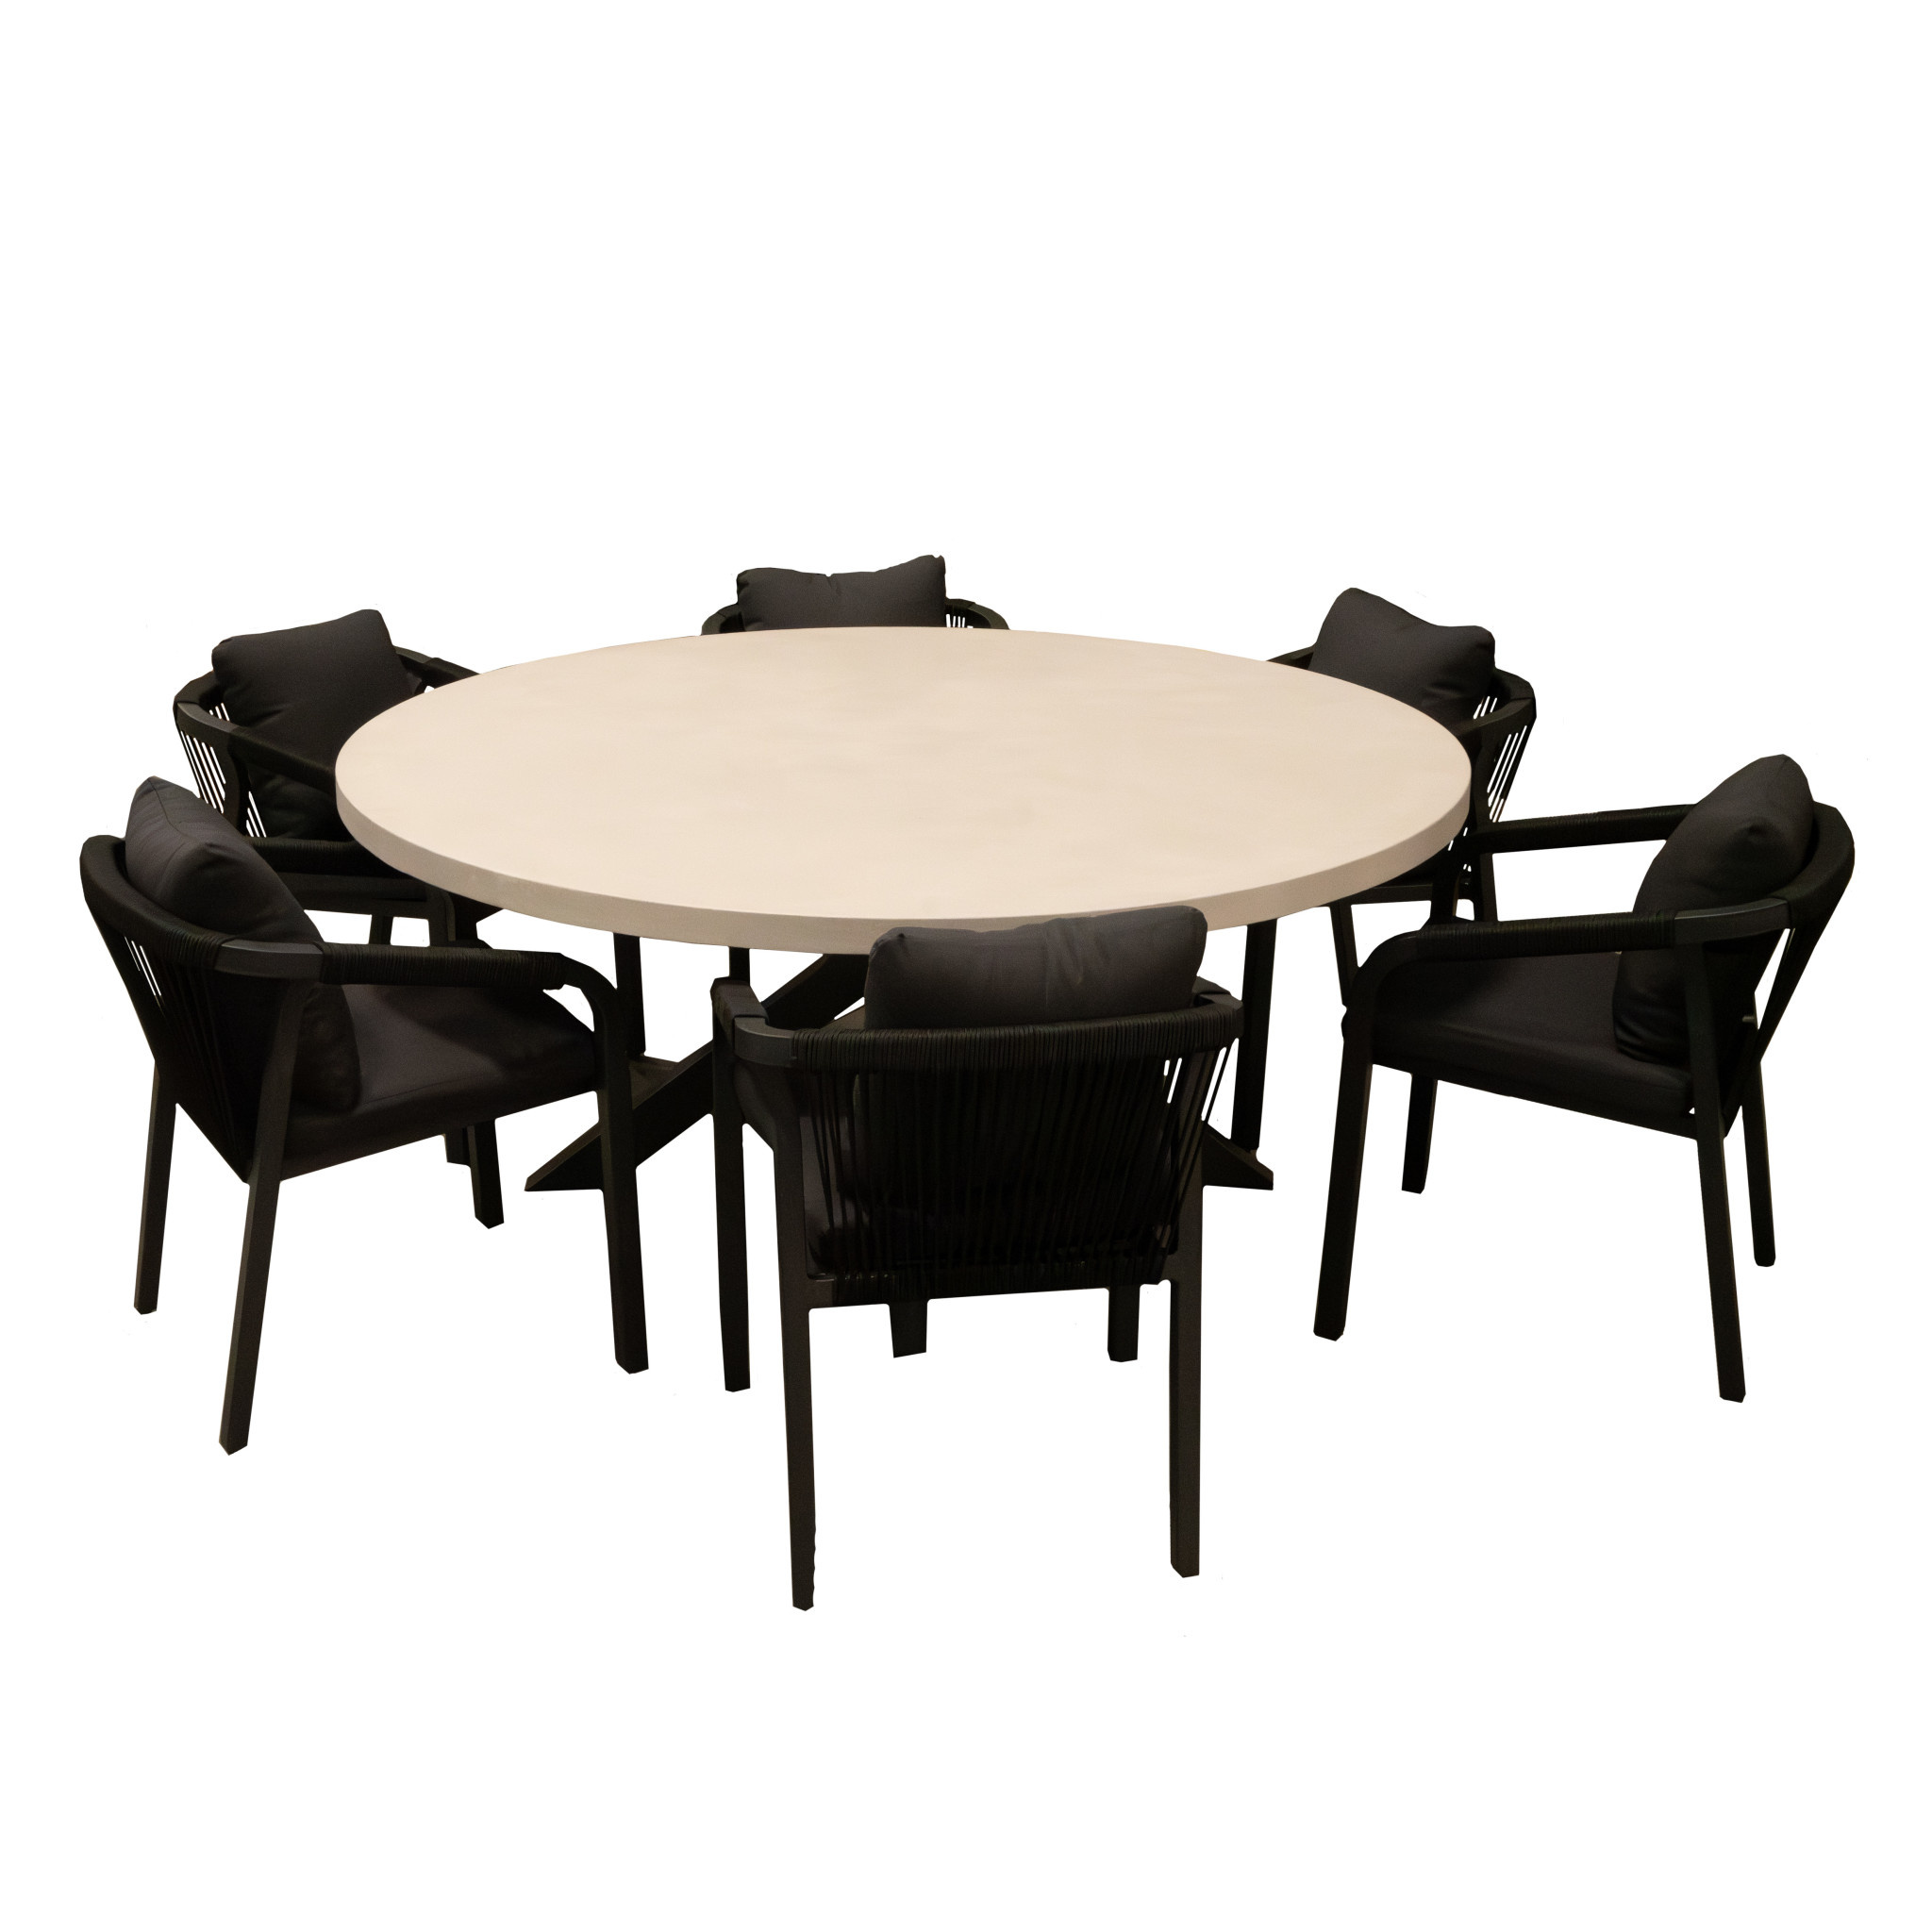 Rift & Ancona Patio Dining Set - 6 Chairs 1 Table